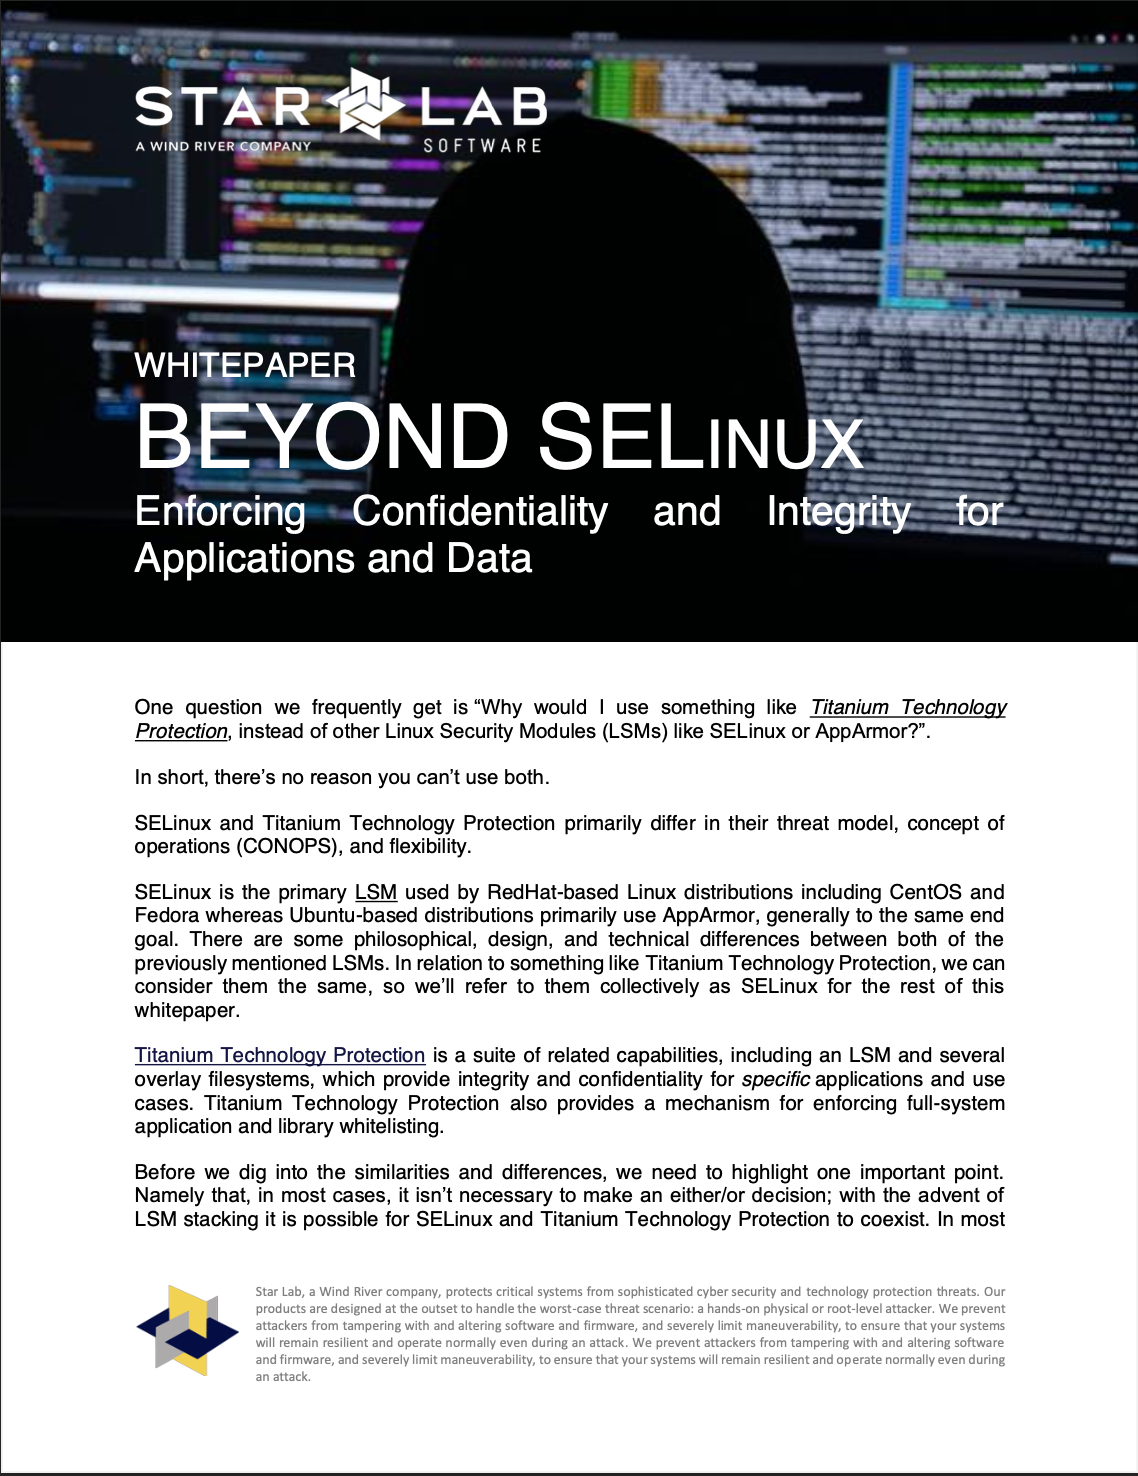 Beyond SE Linux: Enforcing Confidentiality and Integrity for Applications and Data